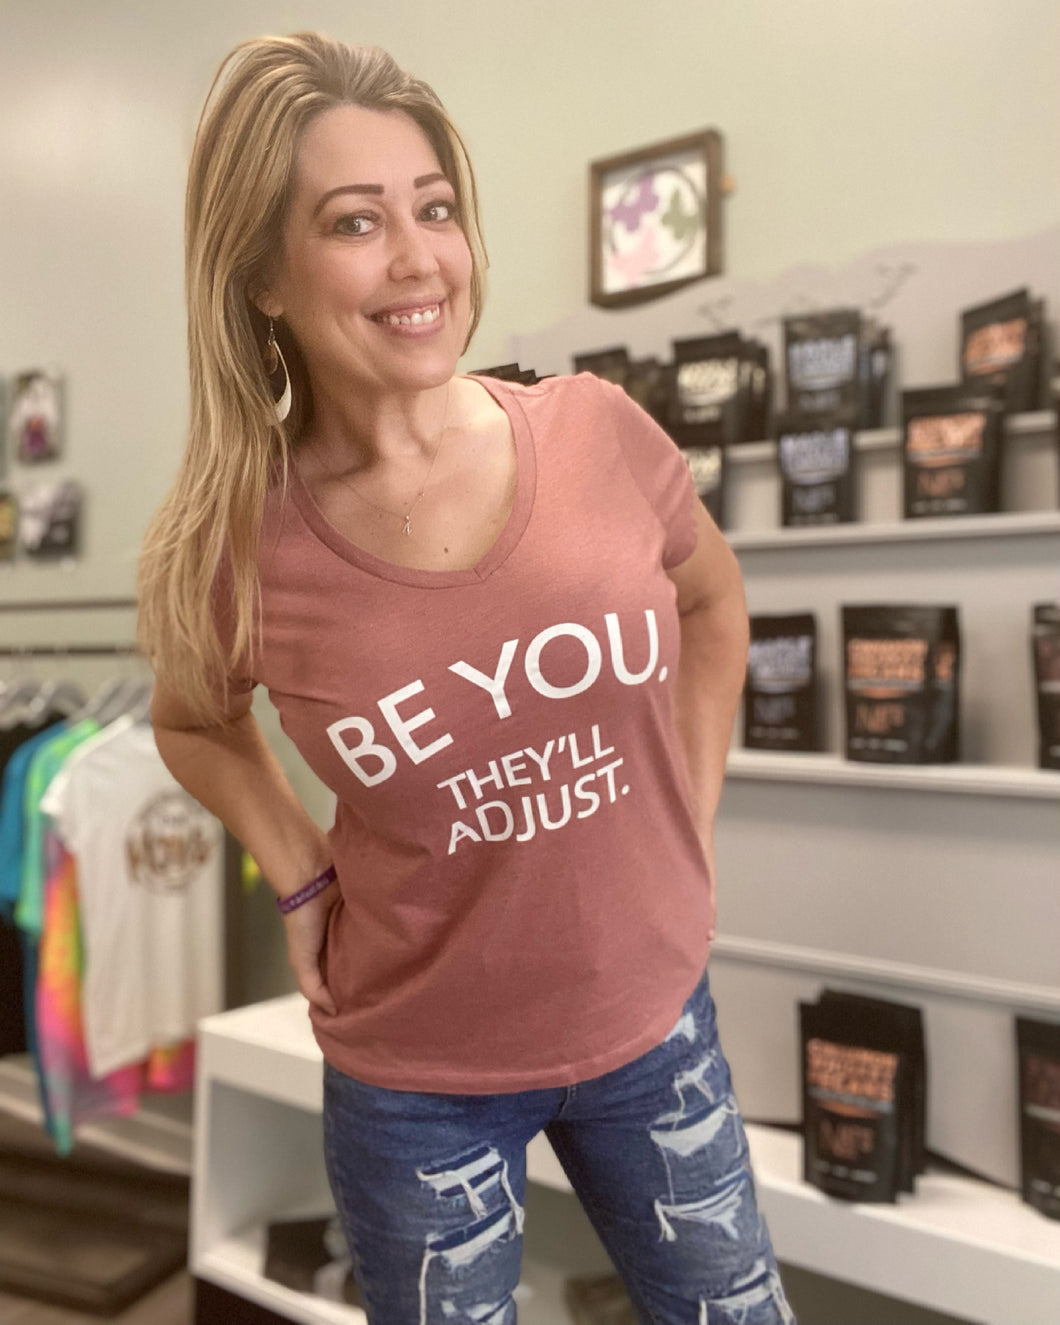 Be you, they’ll adjust t-shirt